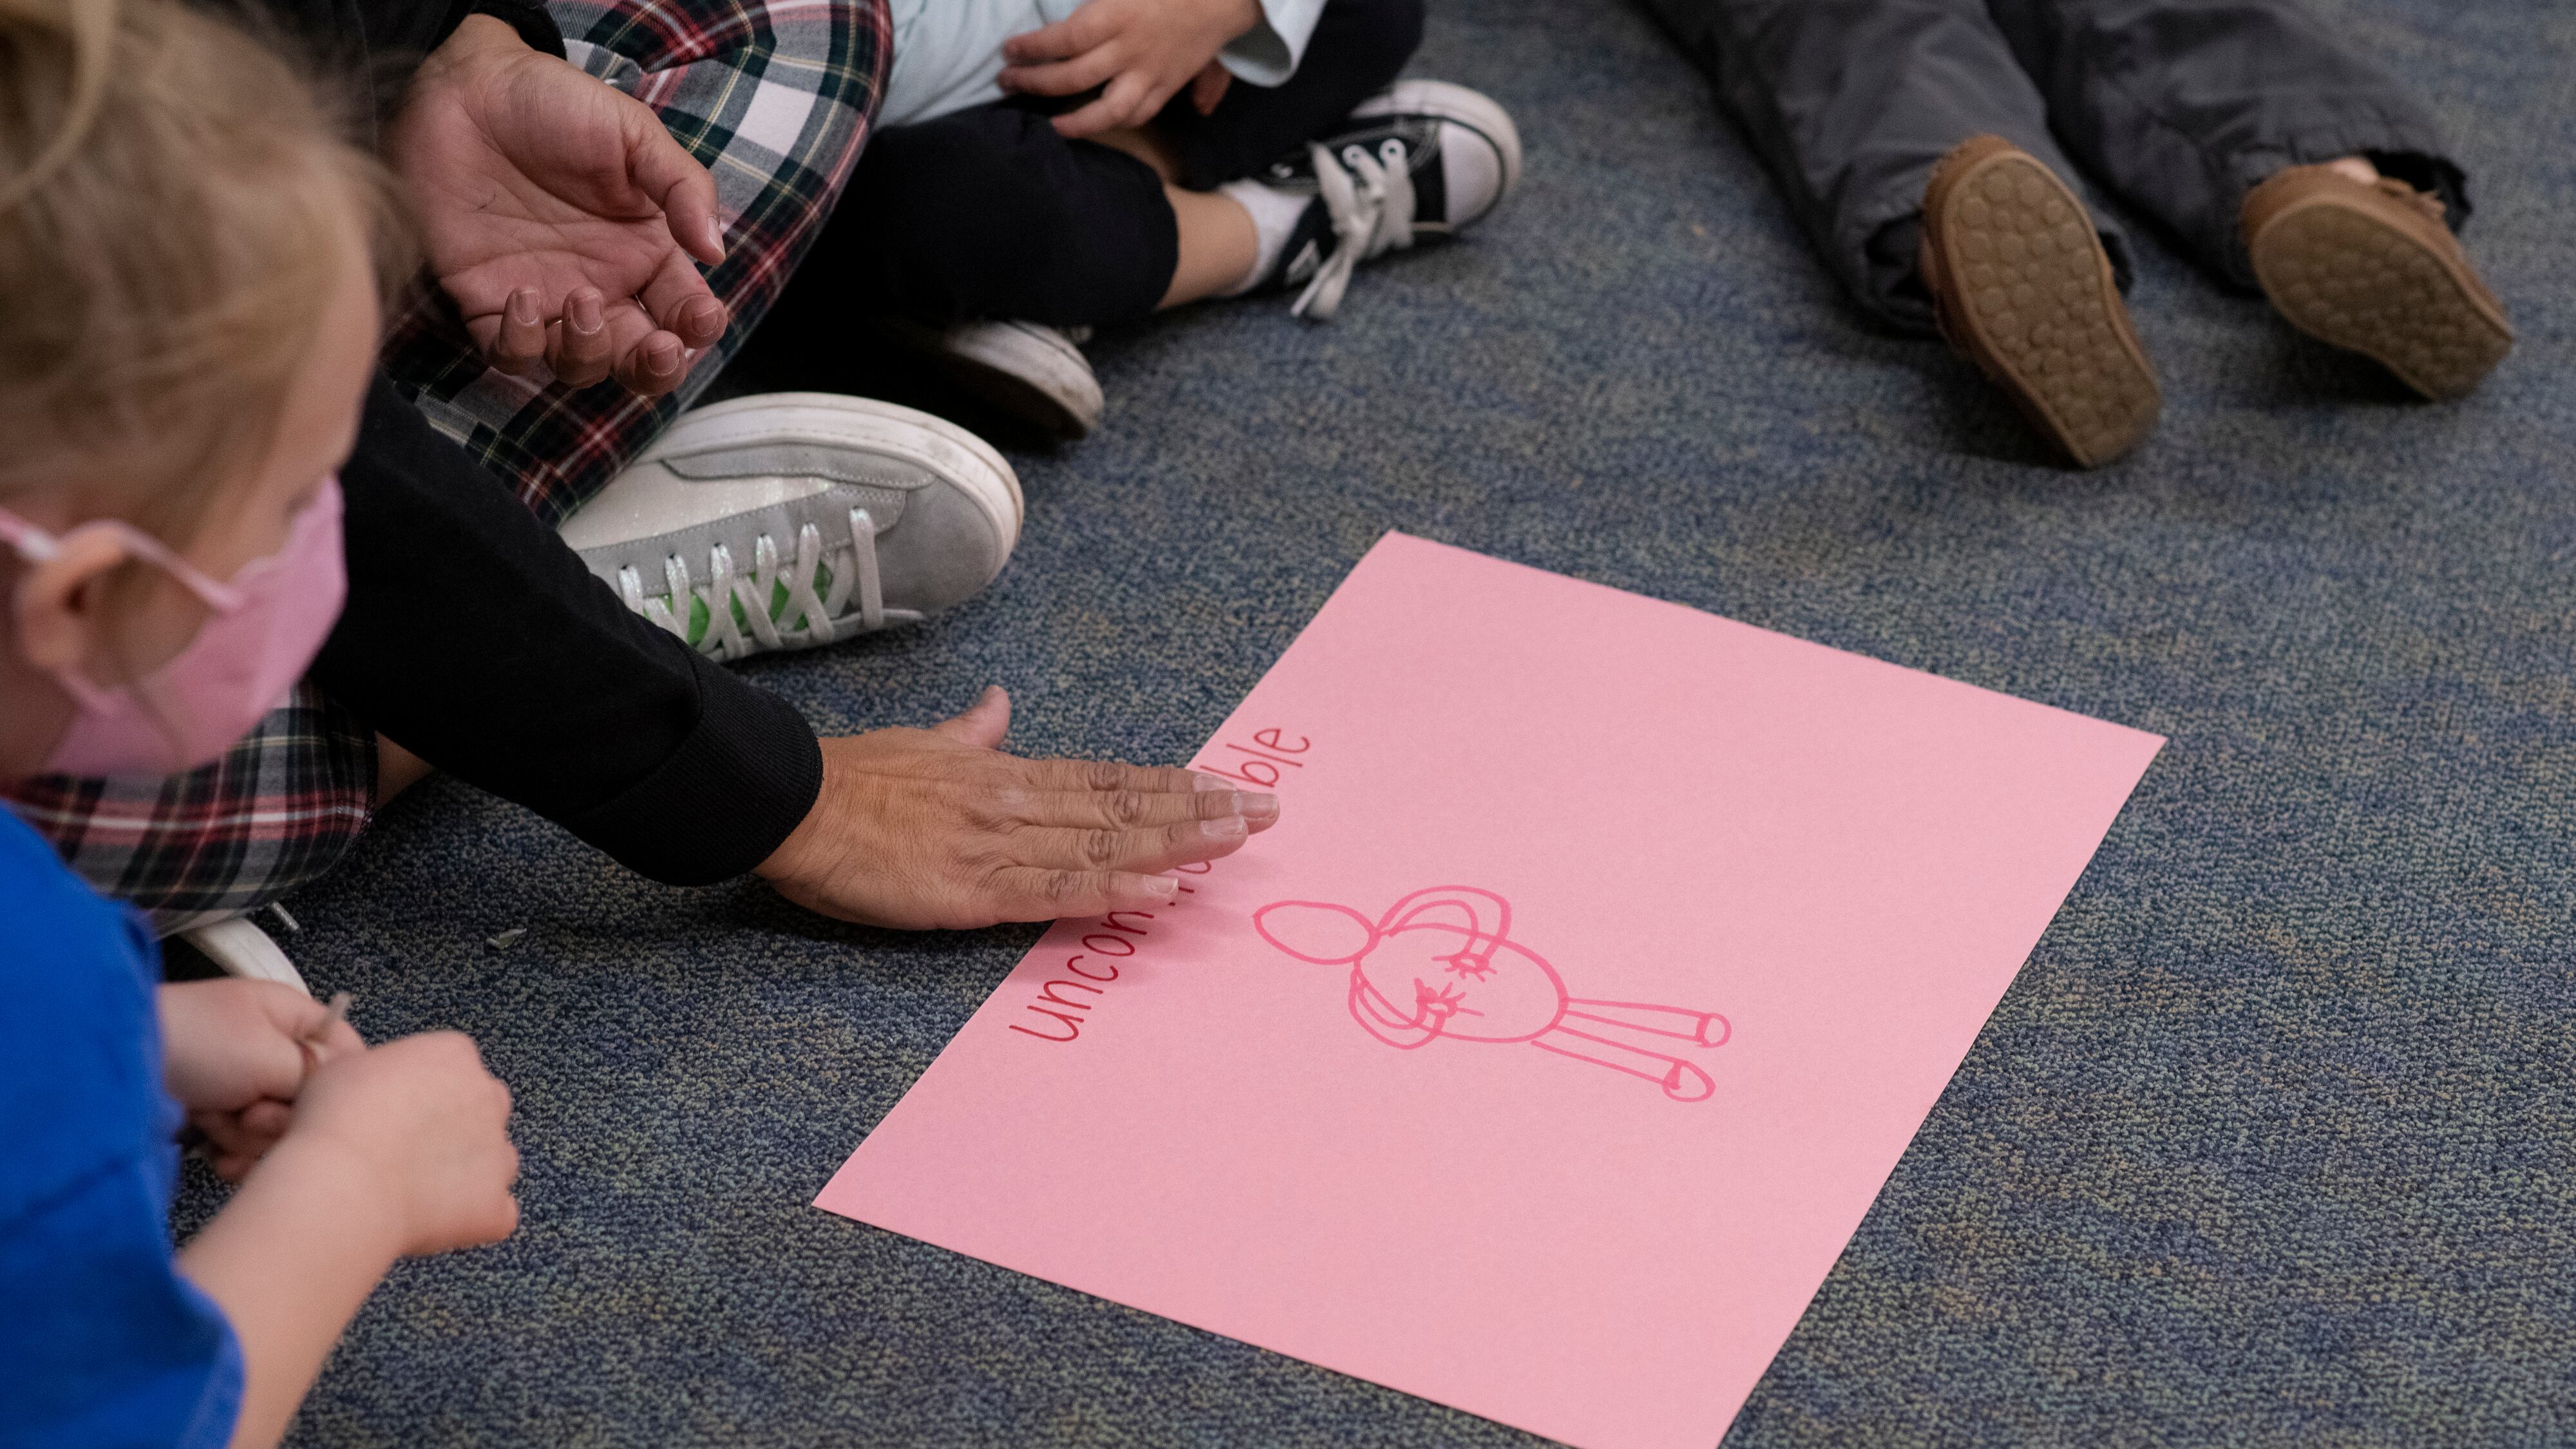 A teacher points to a piece of pink construction paper that has a stick figure drawing and the word “uncomfortable” on it. The teacher is sitting on the rug. Only her feet and hands are visible.